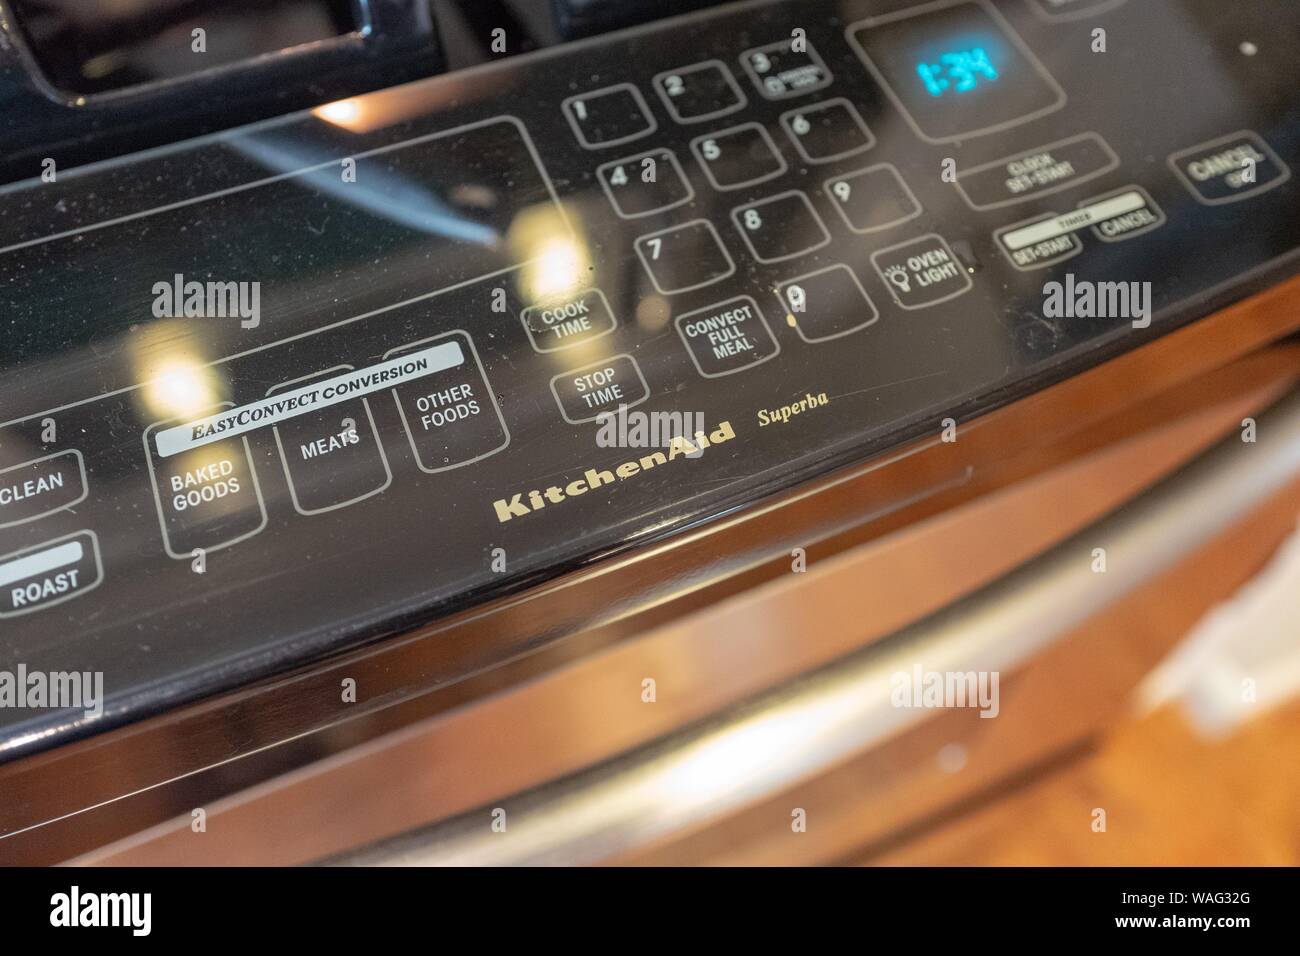 Close-up of the control panel of a KitchenAid Superba oven with logo,  August 19, 2019 Stock Photo - Alamy